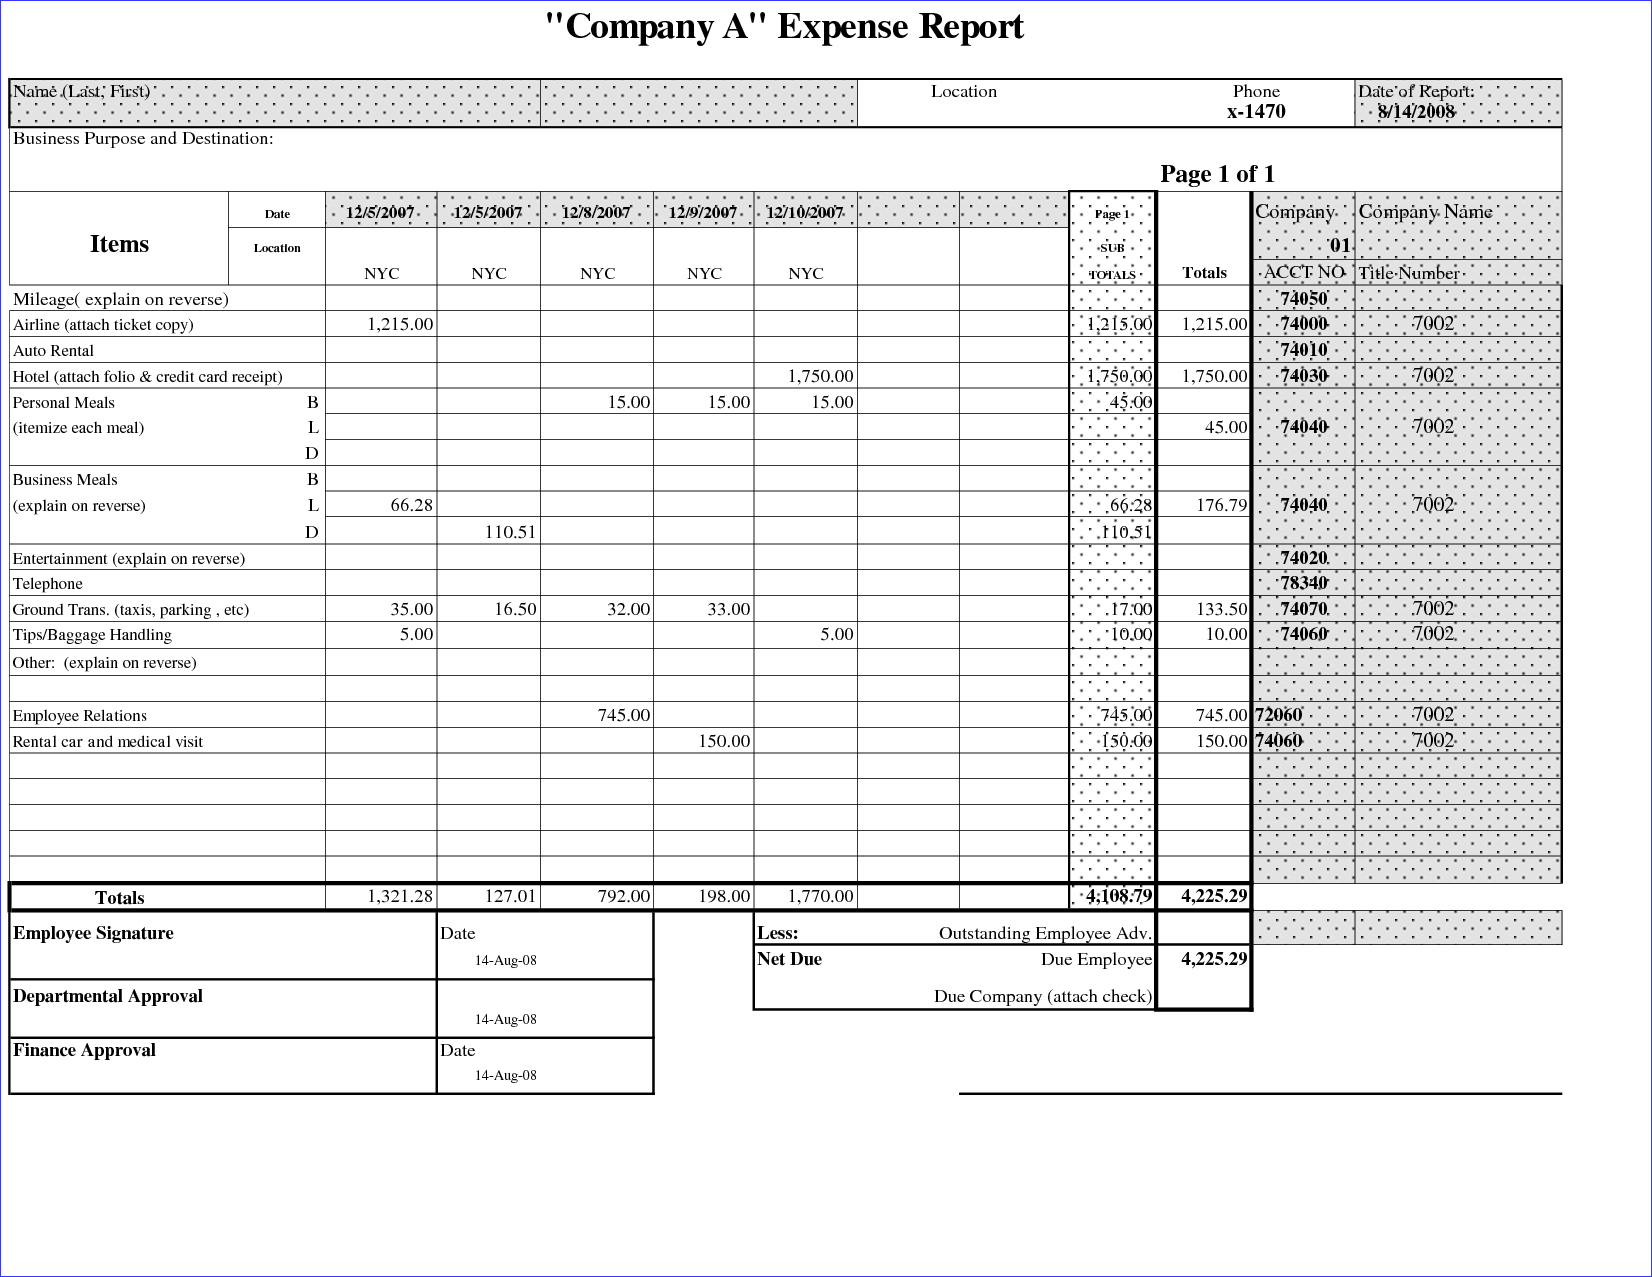 025 Business Expense Report Template Basic Company With Inside Company Expense Report Template